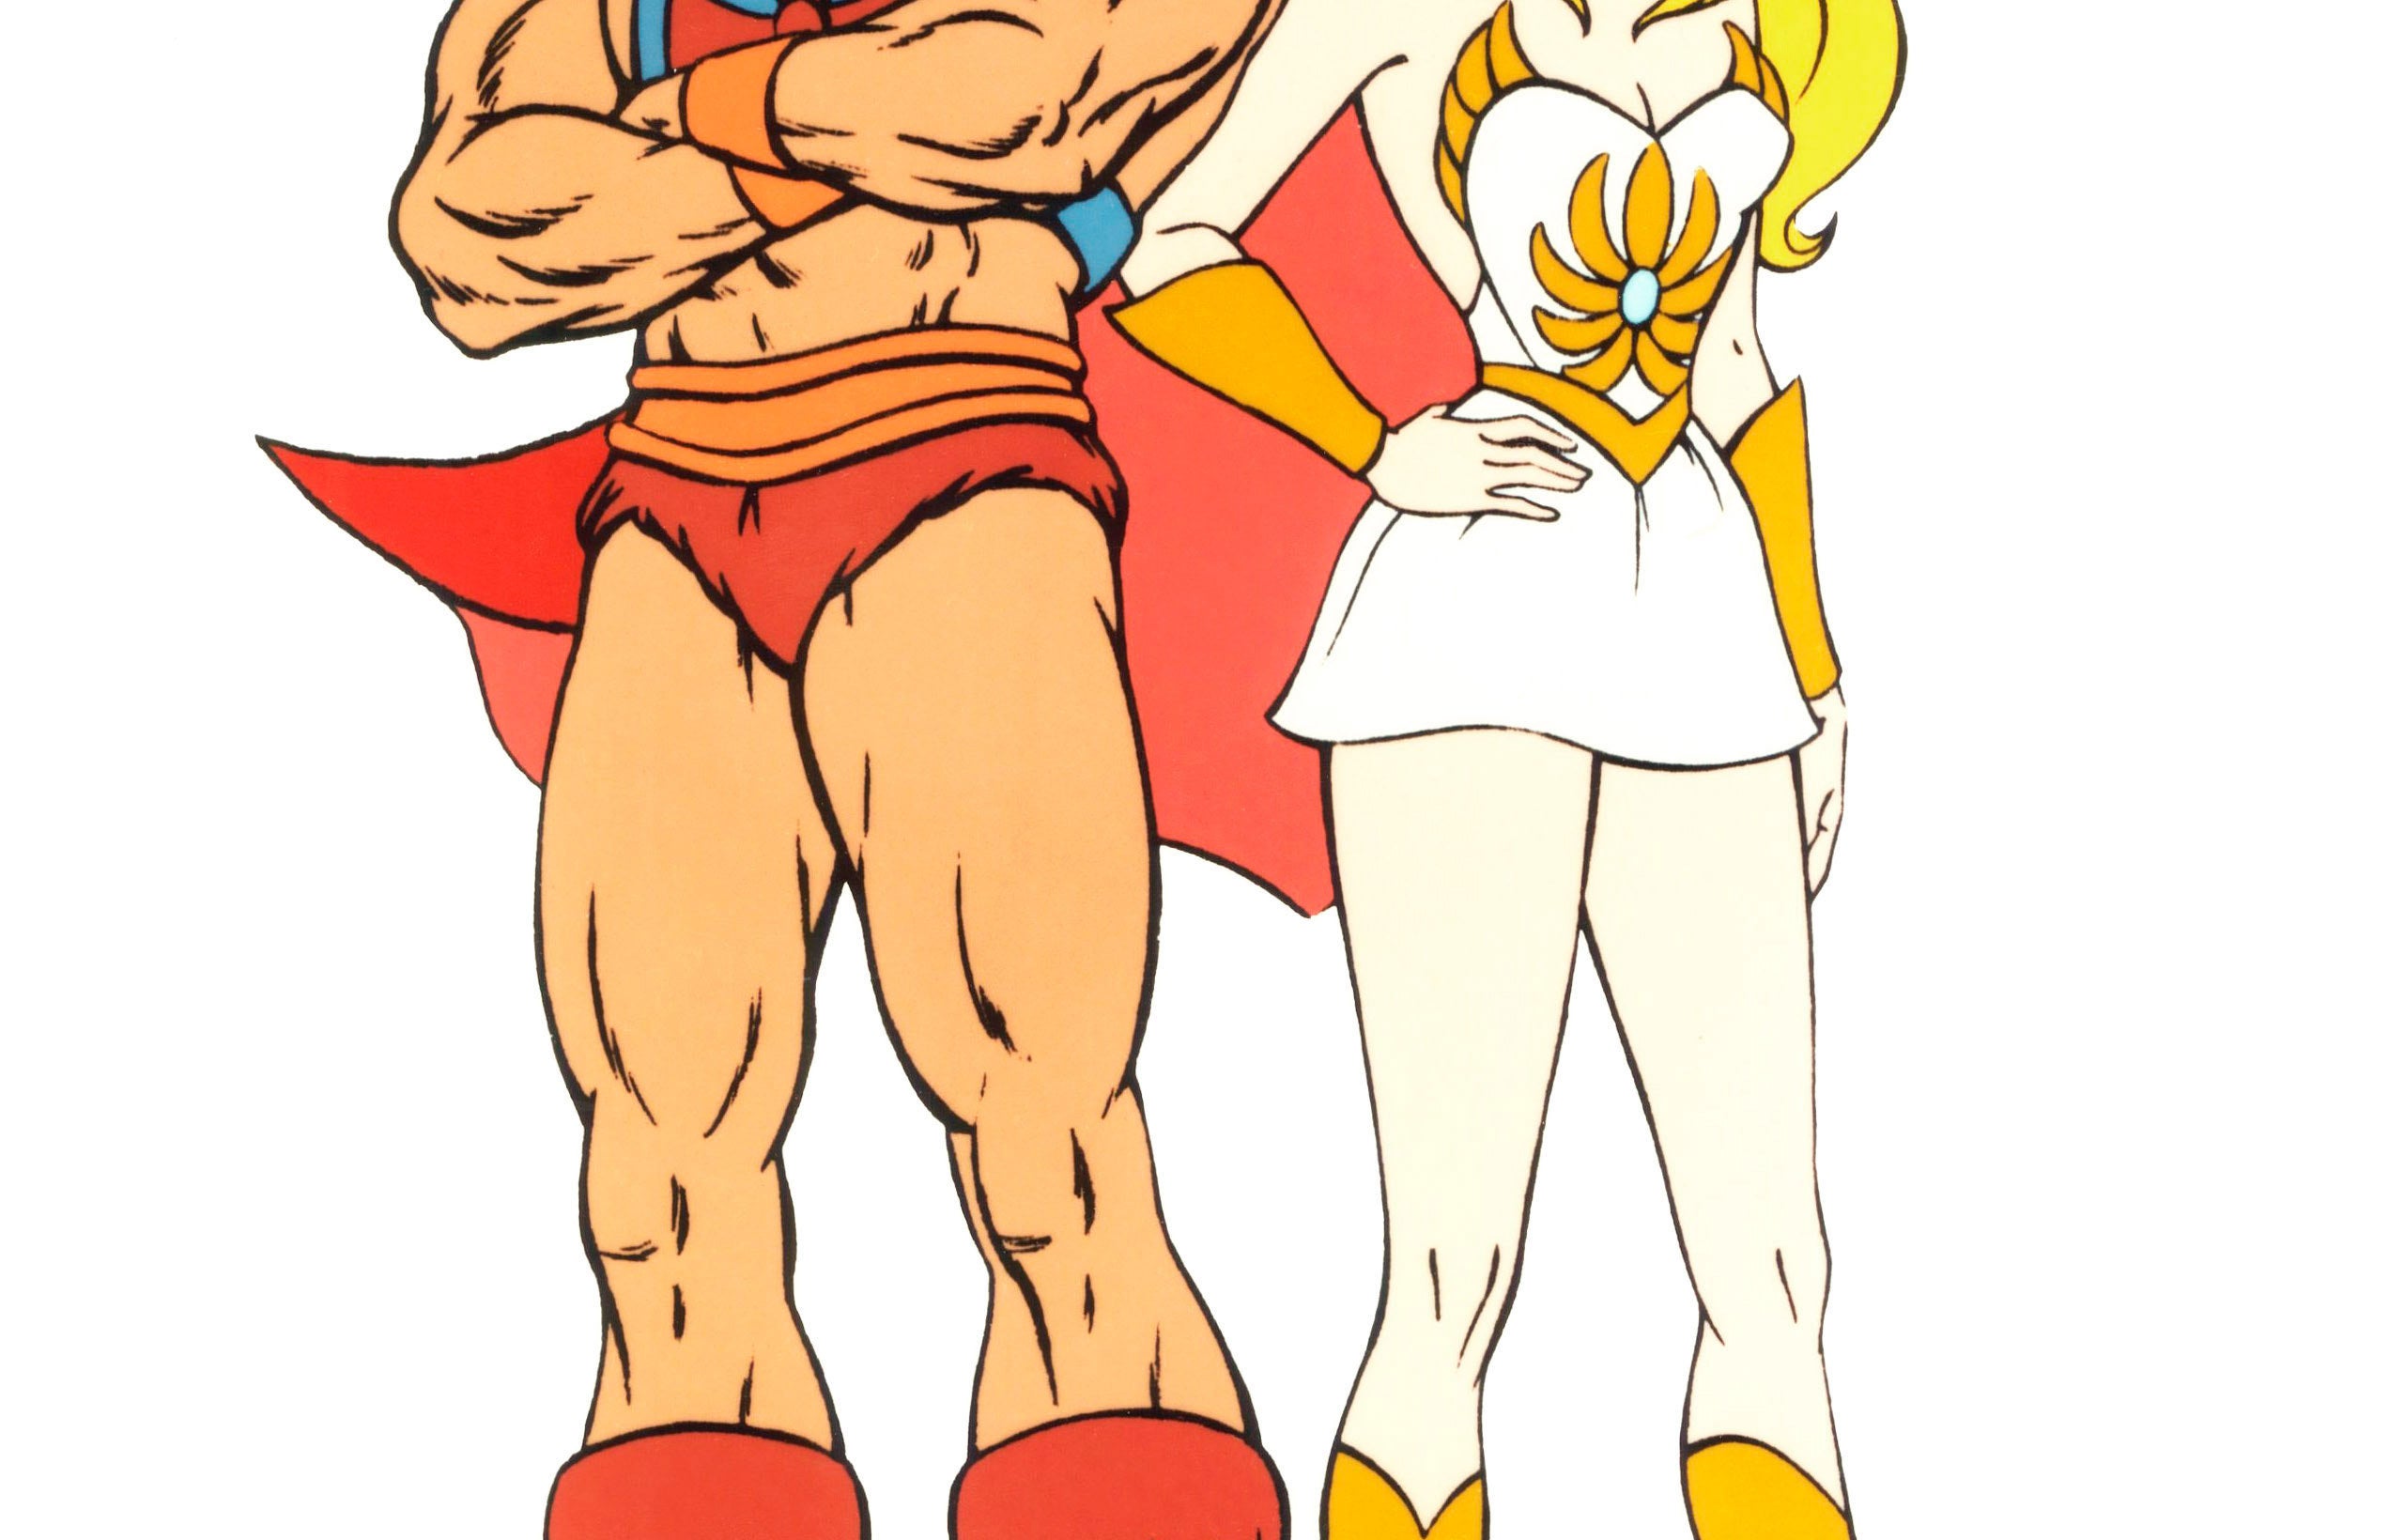 He-Man and She-Ra standing next to each other